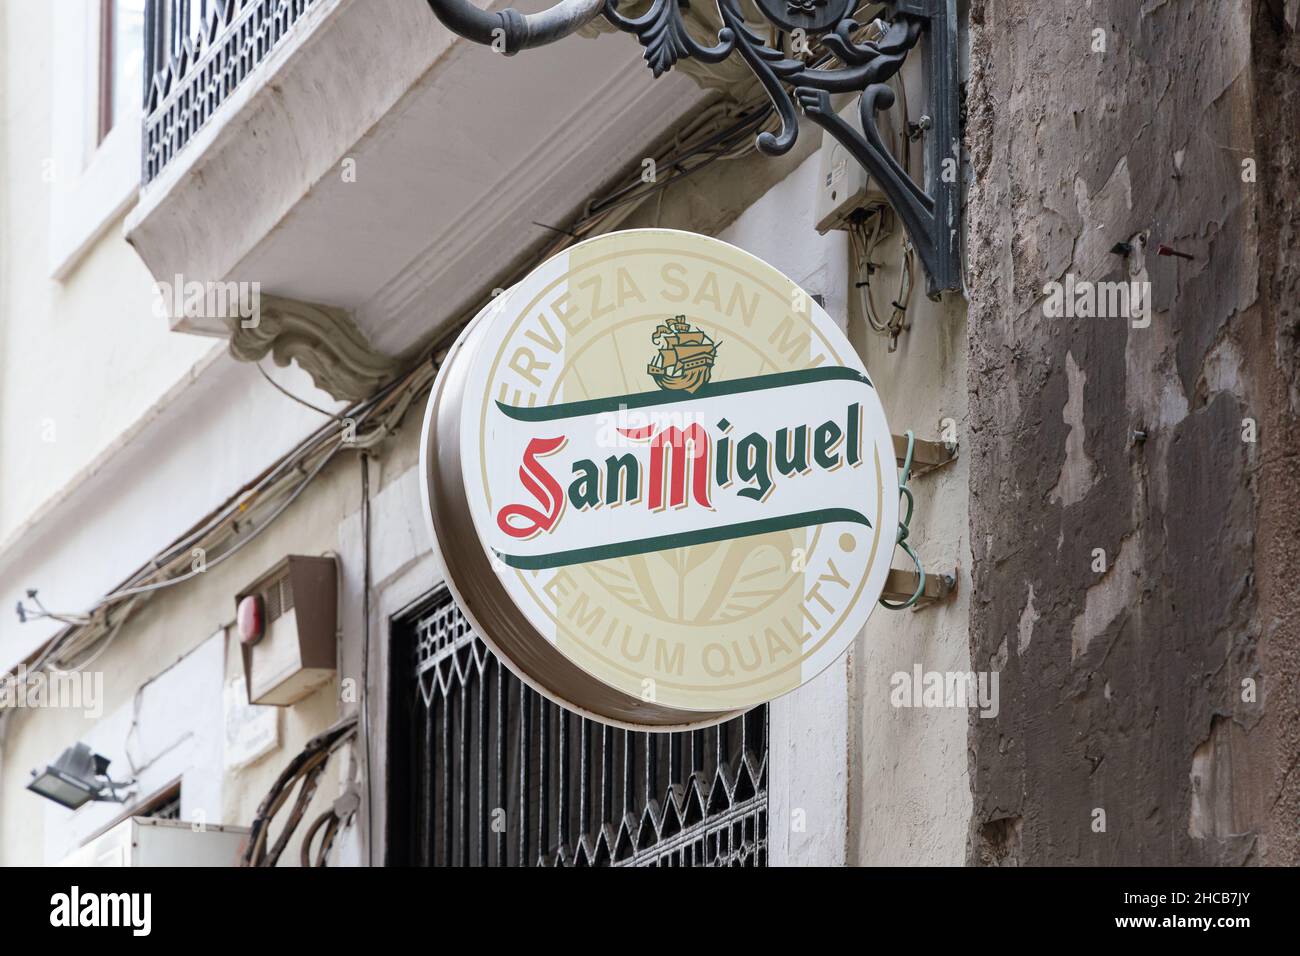 VALENCIA, SPAIN - DECEMBER 26, 2021: San Miguel is a Spanish brewing company based in Malaga, Andalucia, Spain Stock Photo